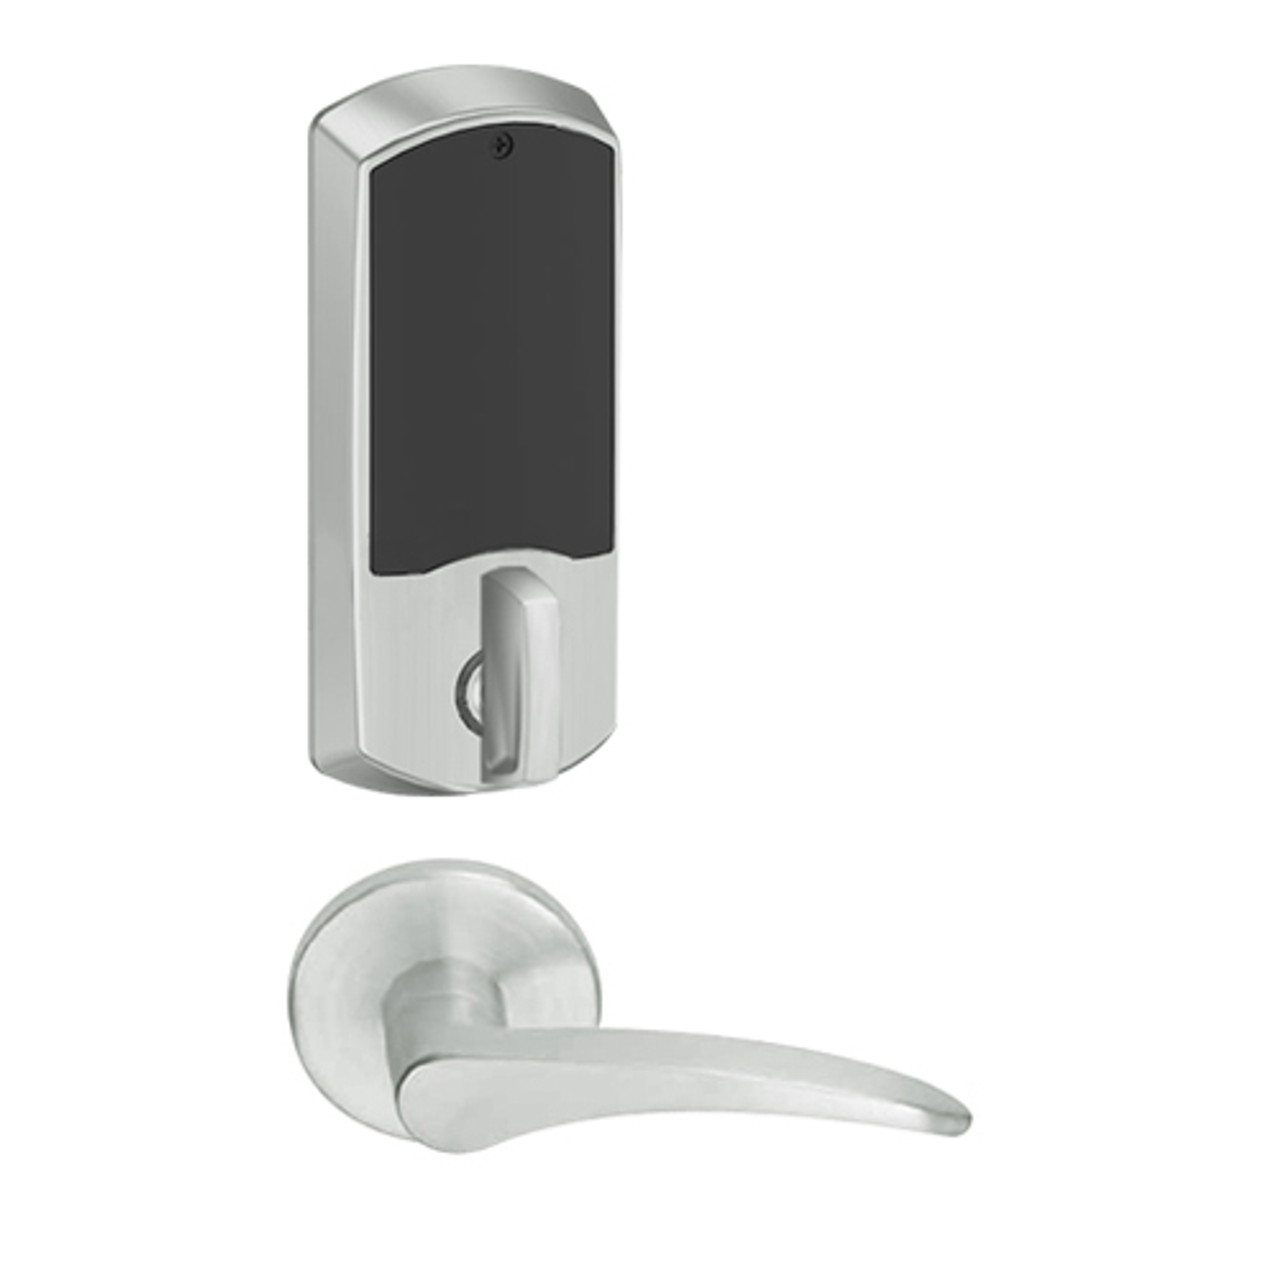 LEMD-GRW-L-12-619-00C-RH Schlage Less Cylinder Privacy/Apartment Wireless Greenwich Mortise Deadbolt Lock with LED and 12 Lever in Satin Nickel